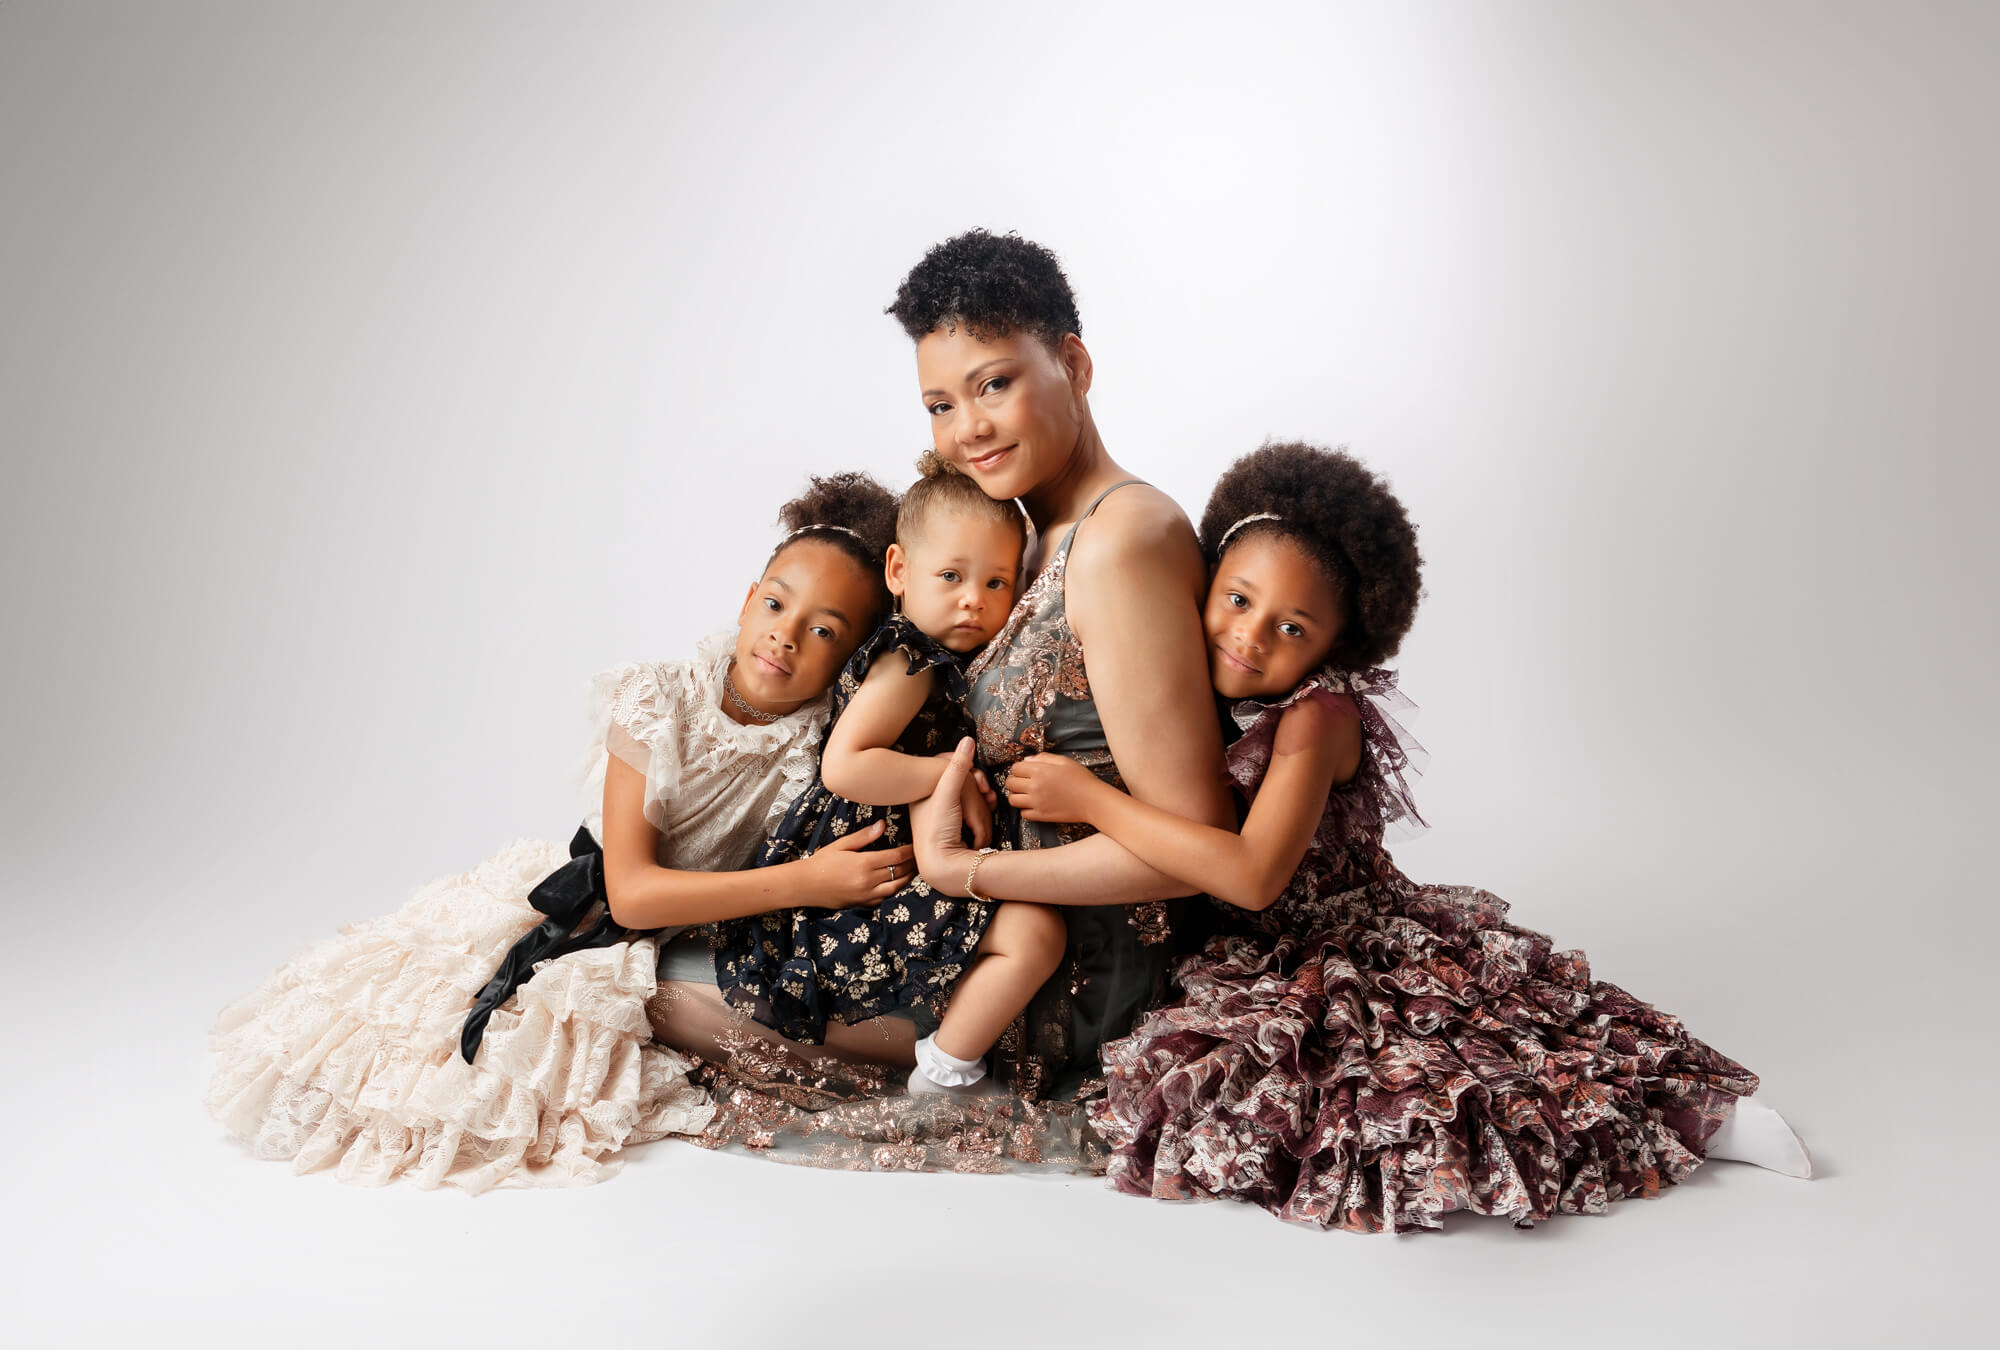 San Diego Portrait Photographer capturing precious moments of mome and her three girls during an empowerment shoot